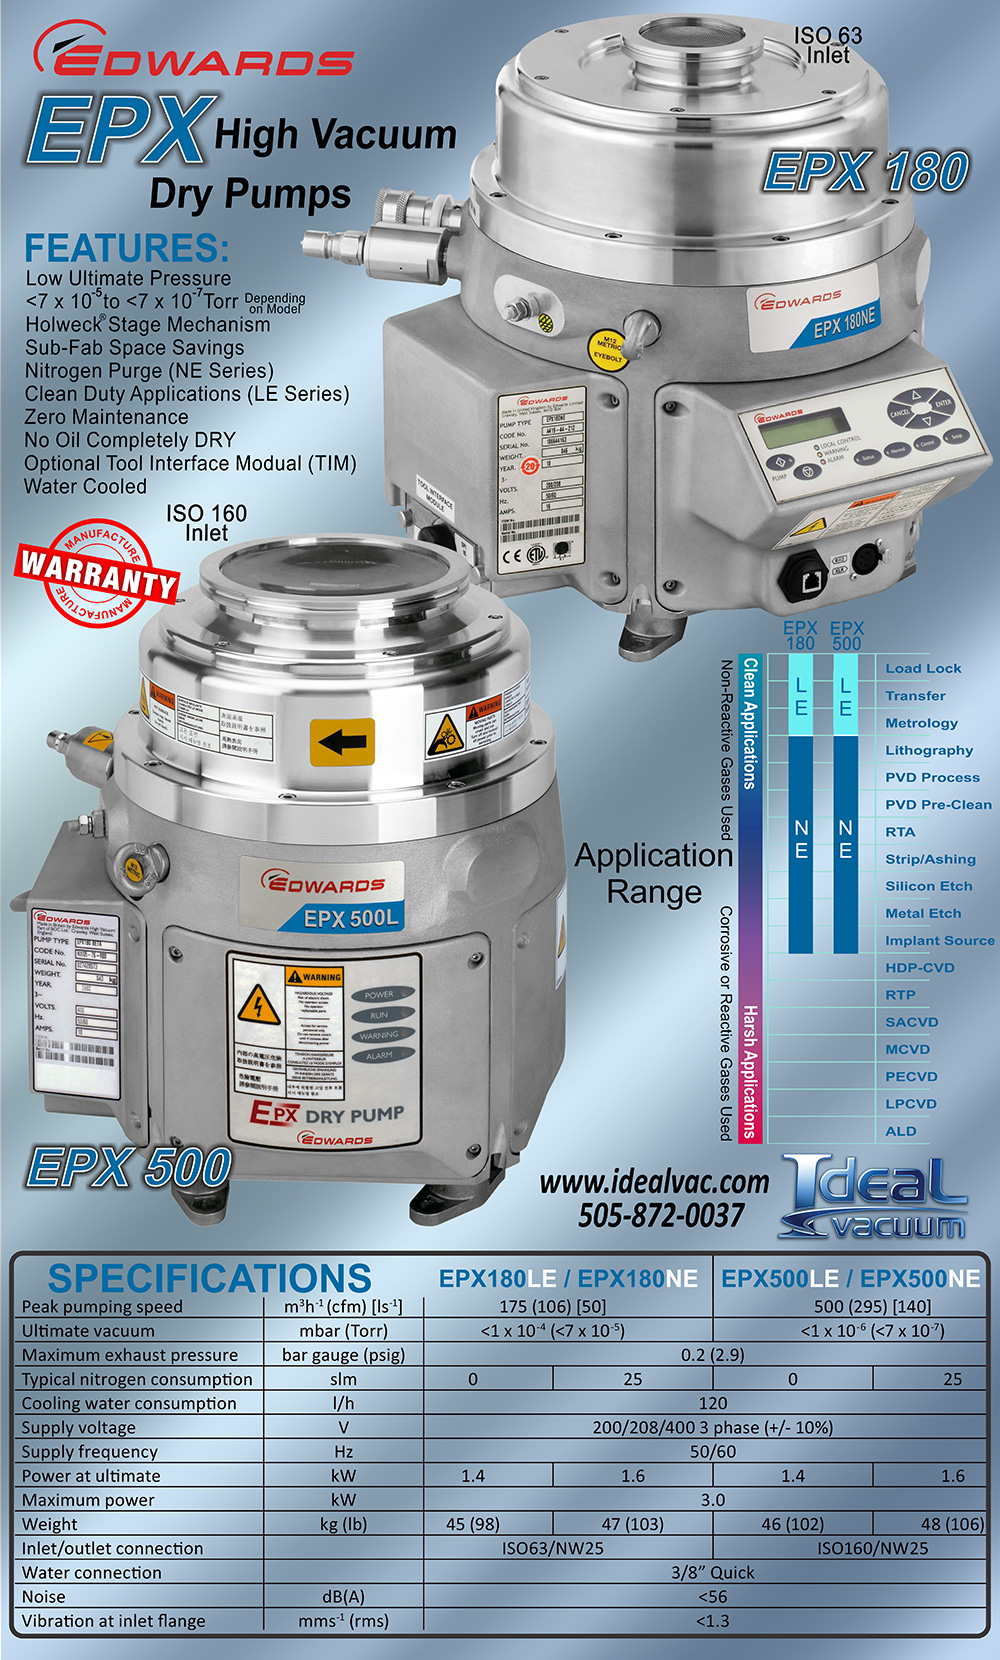 Edwards EPX Dry Pumps